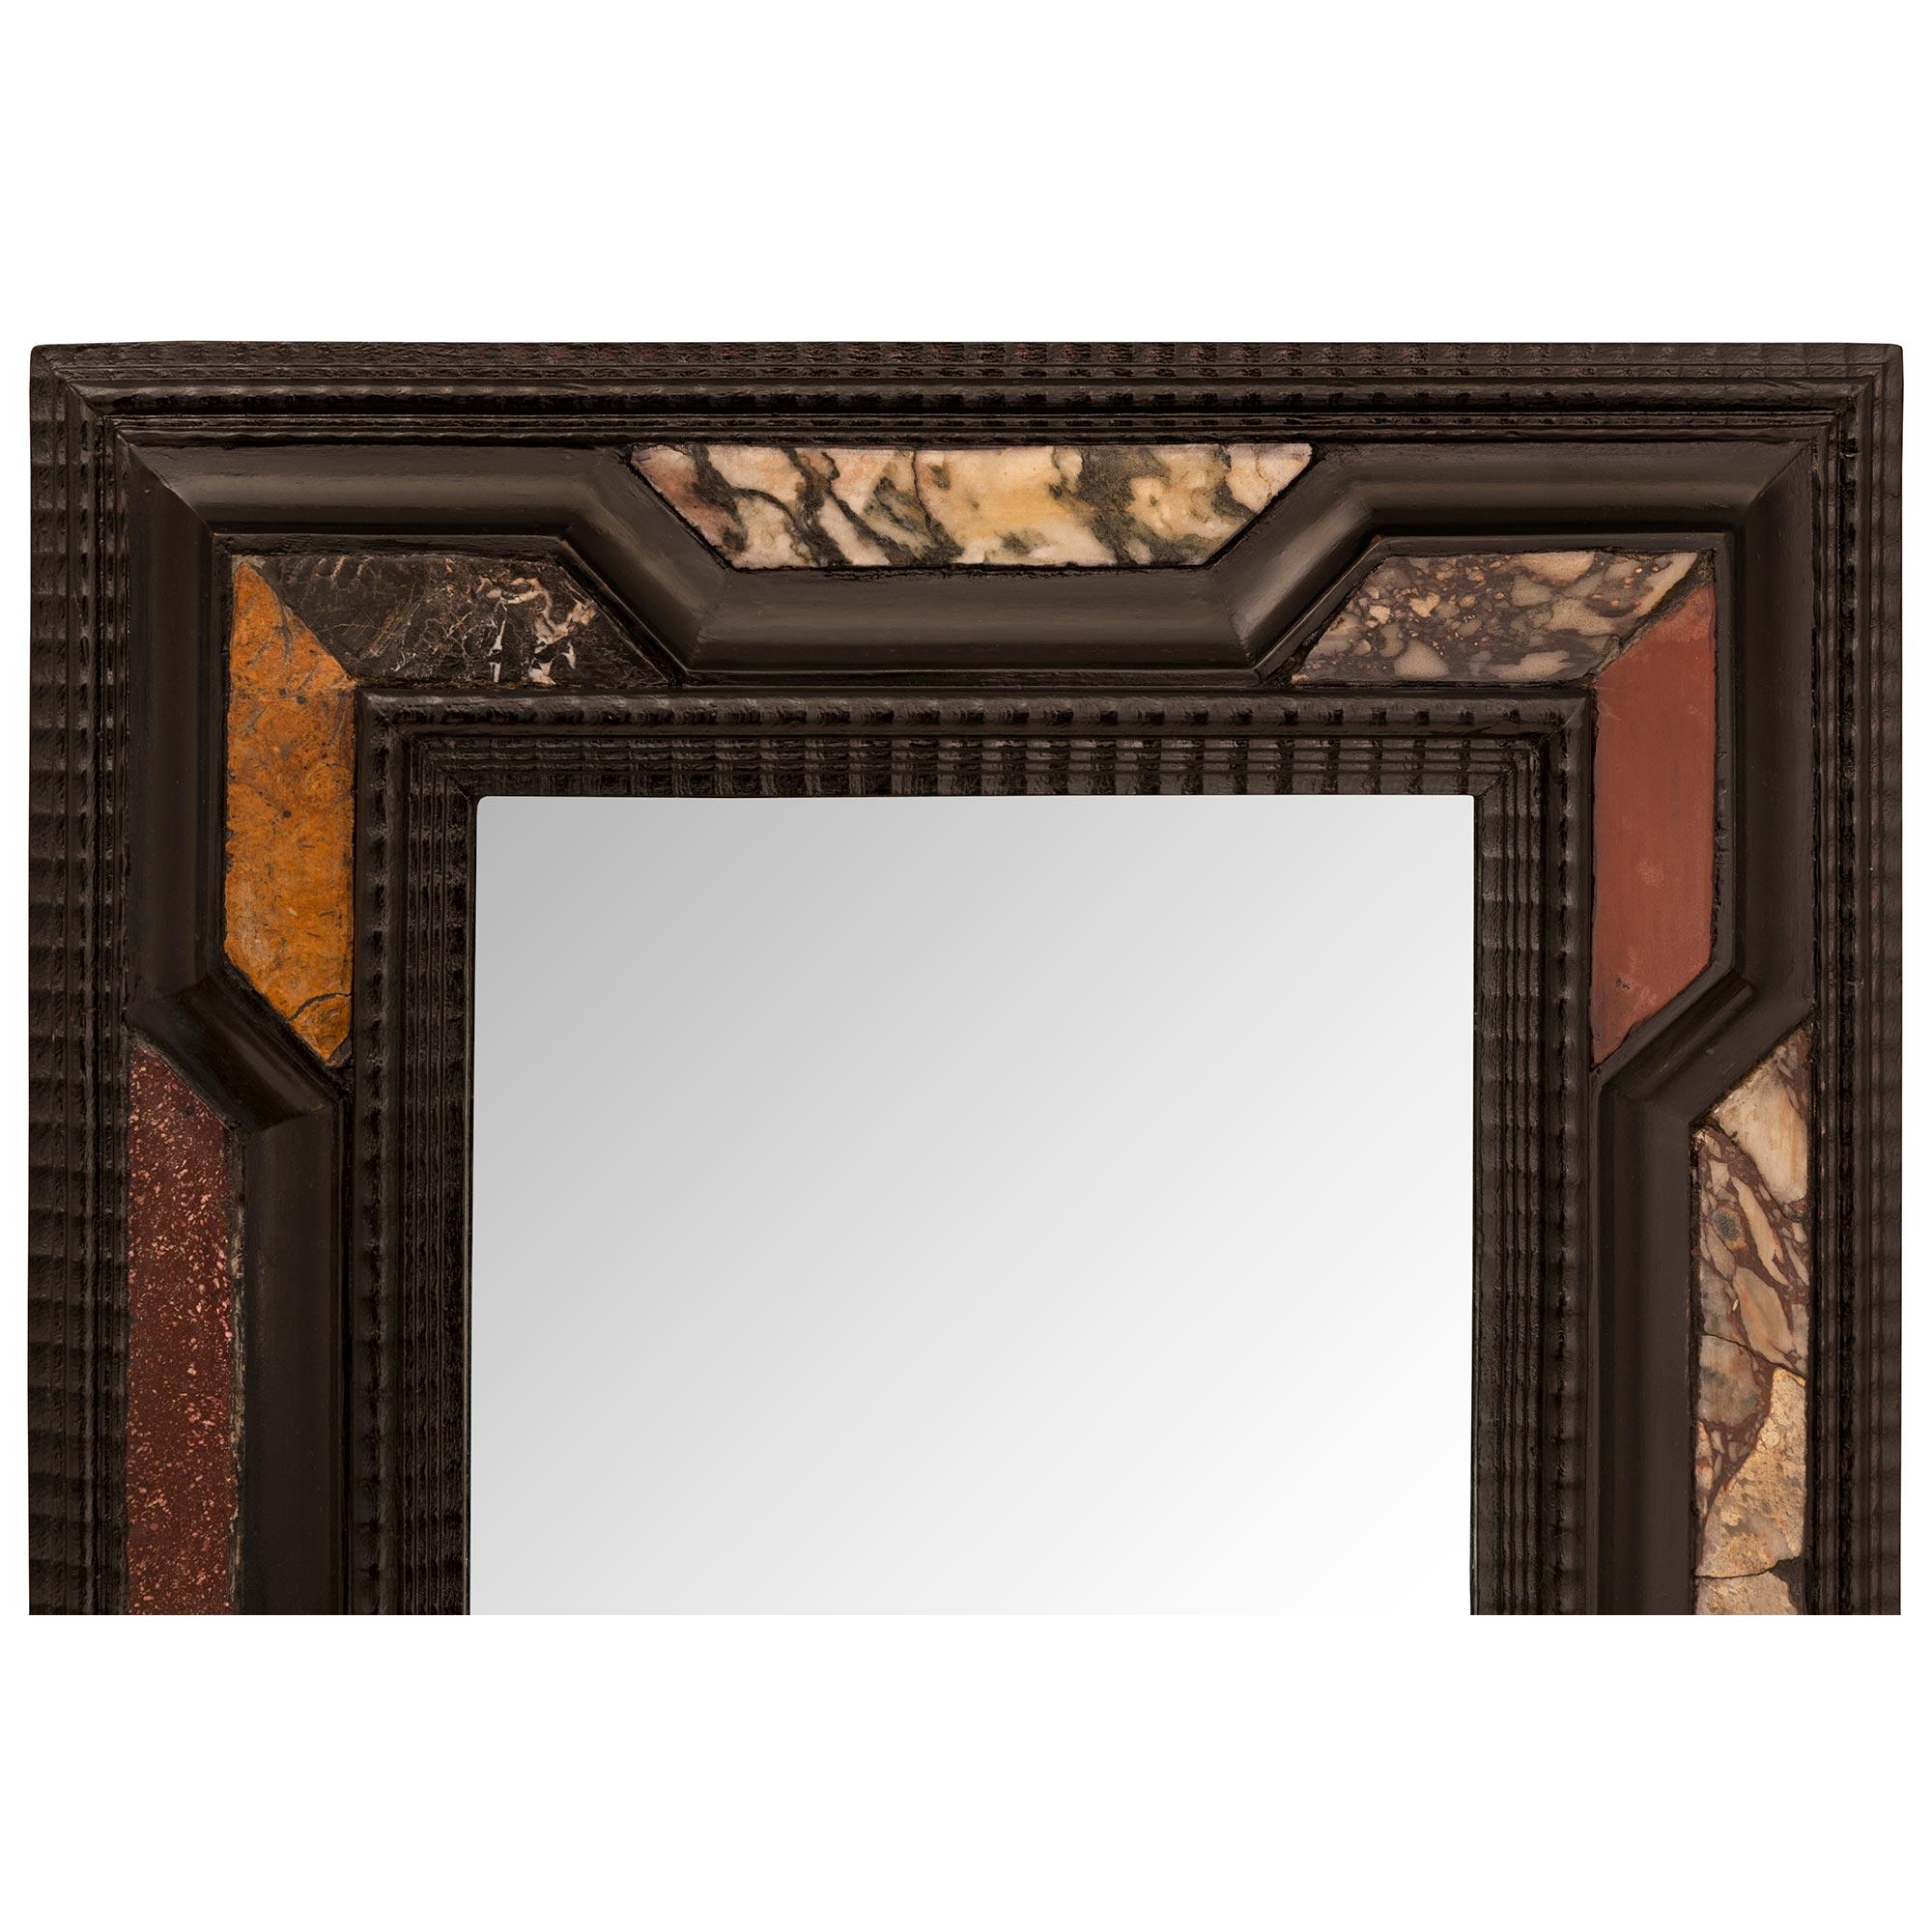 Pair Of Italian 19th Century Florentine St. Ebonized Fruitwood And Marble Mirror For Sale 1